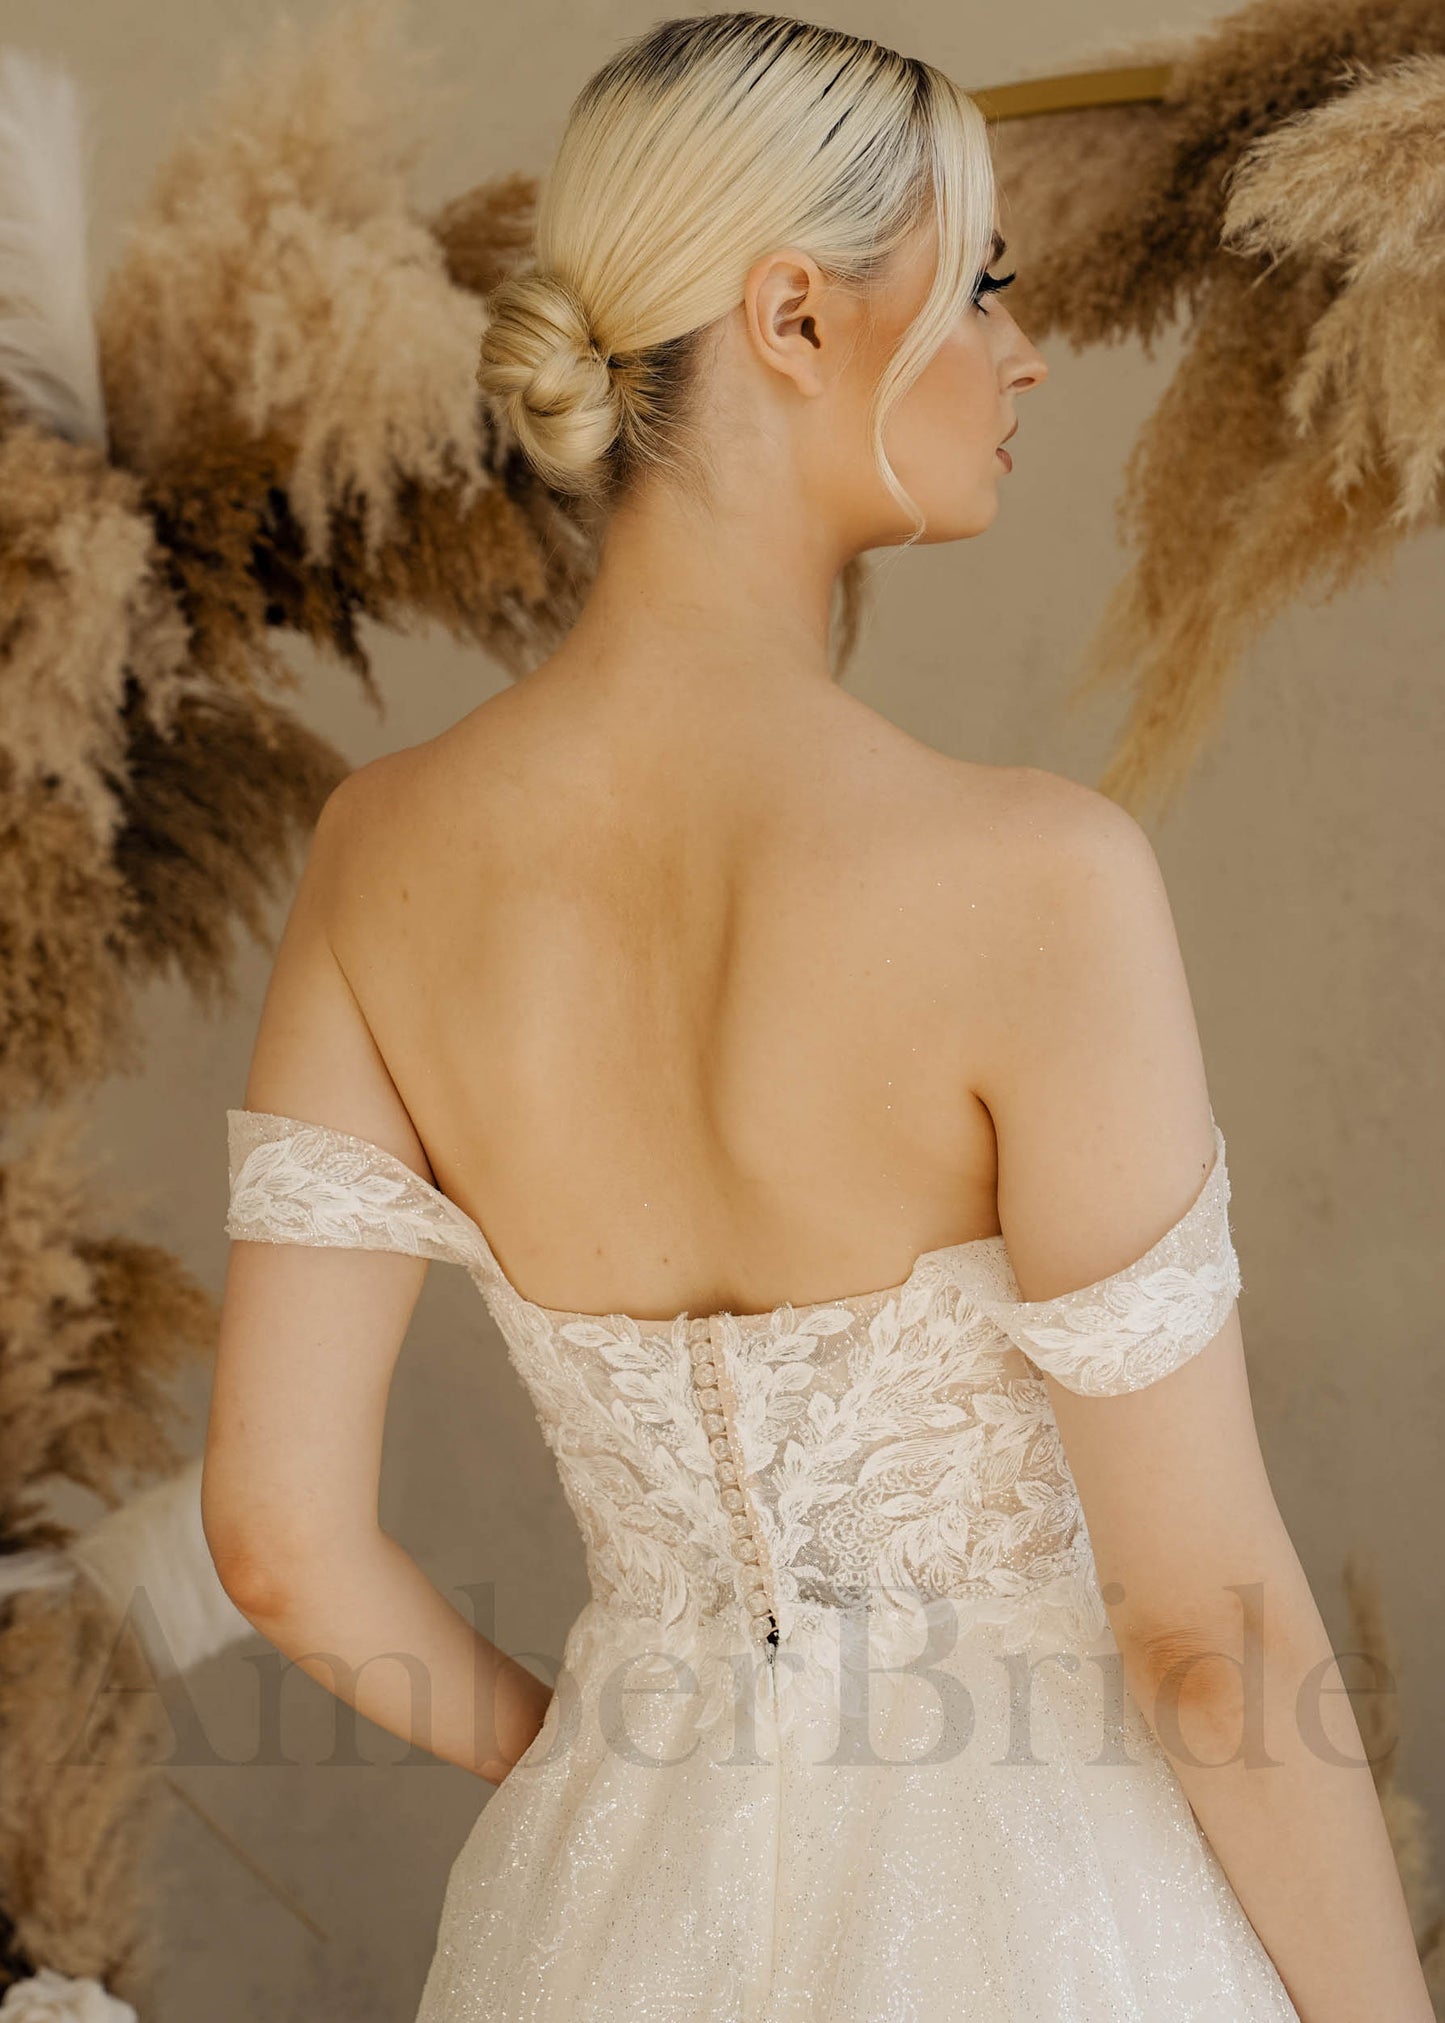 Rustic Off Shoulder Wedding dress with Lace Flowers and Backless Design